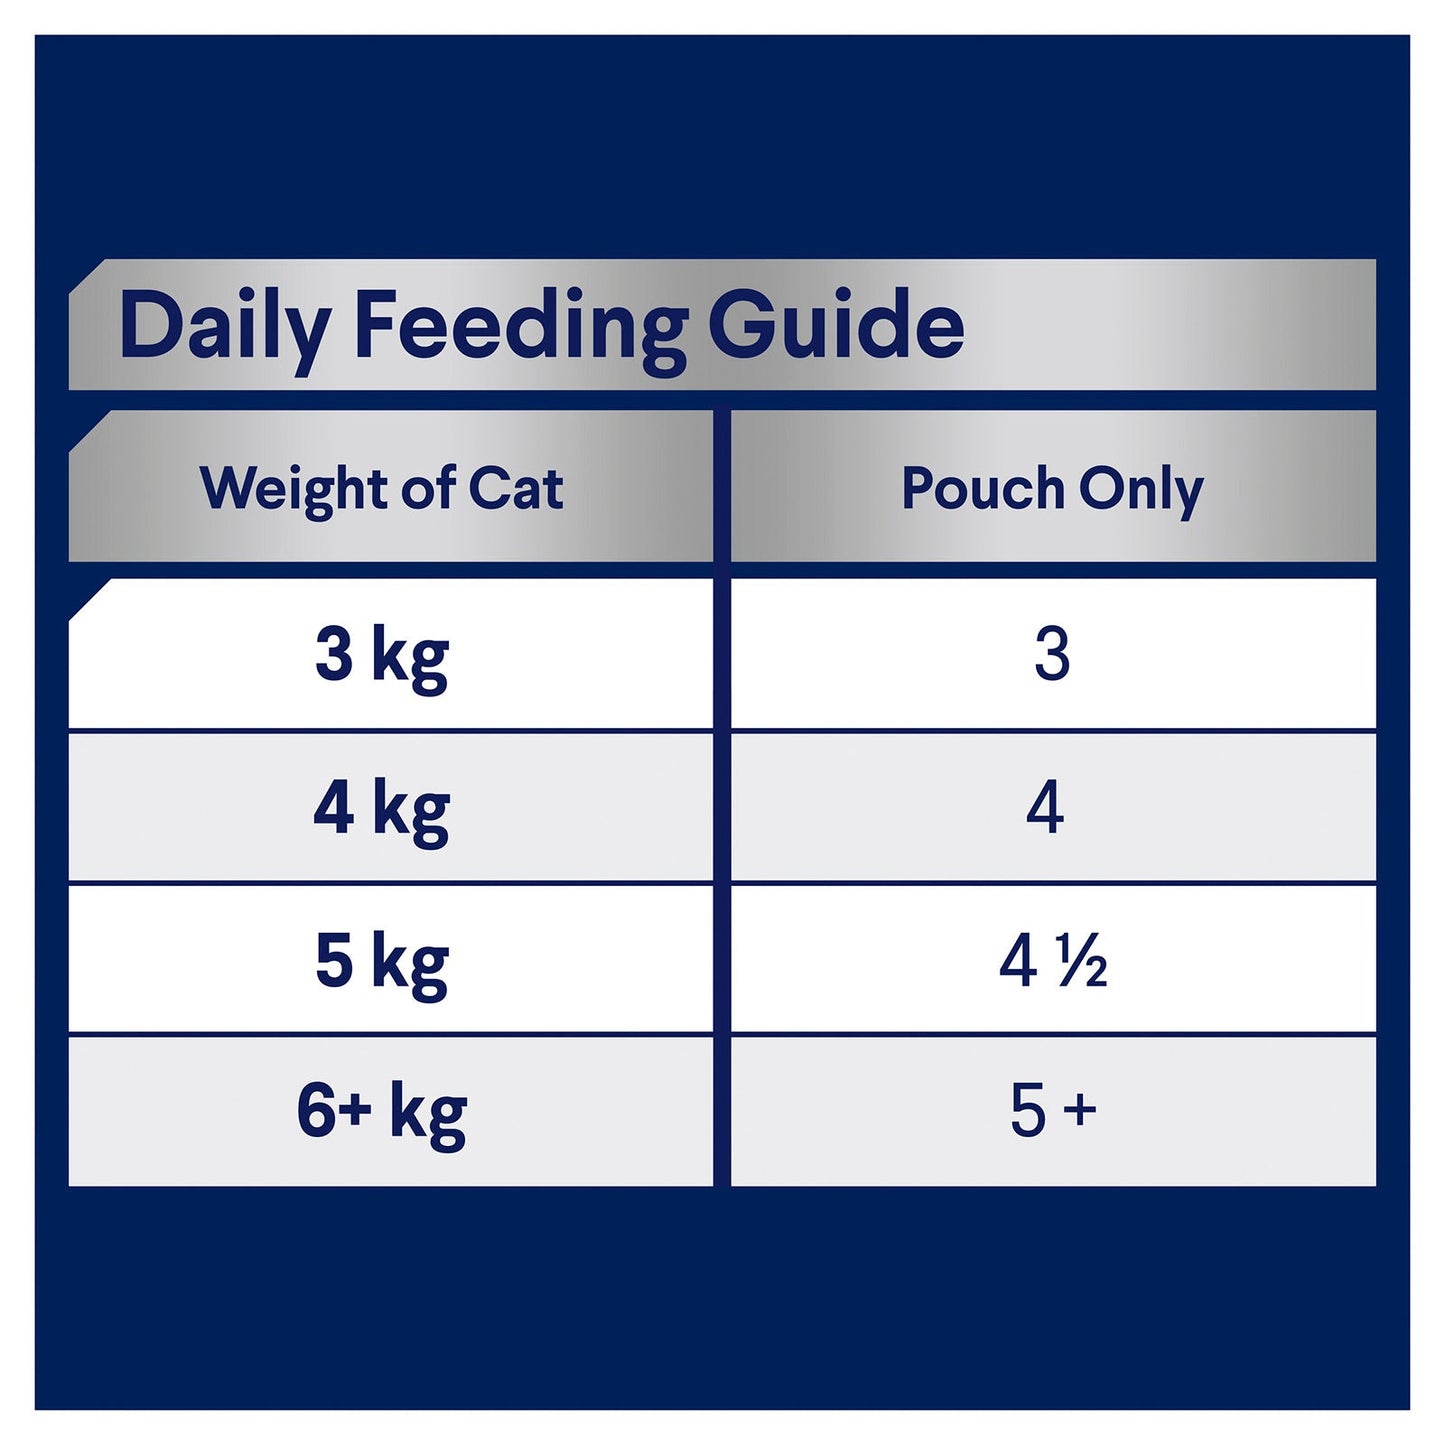 Advance Wet Cat Food Adult Healthy Ageing 8+ Ocean Fish 85g - Woonona Petfood & Produce